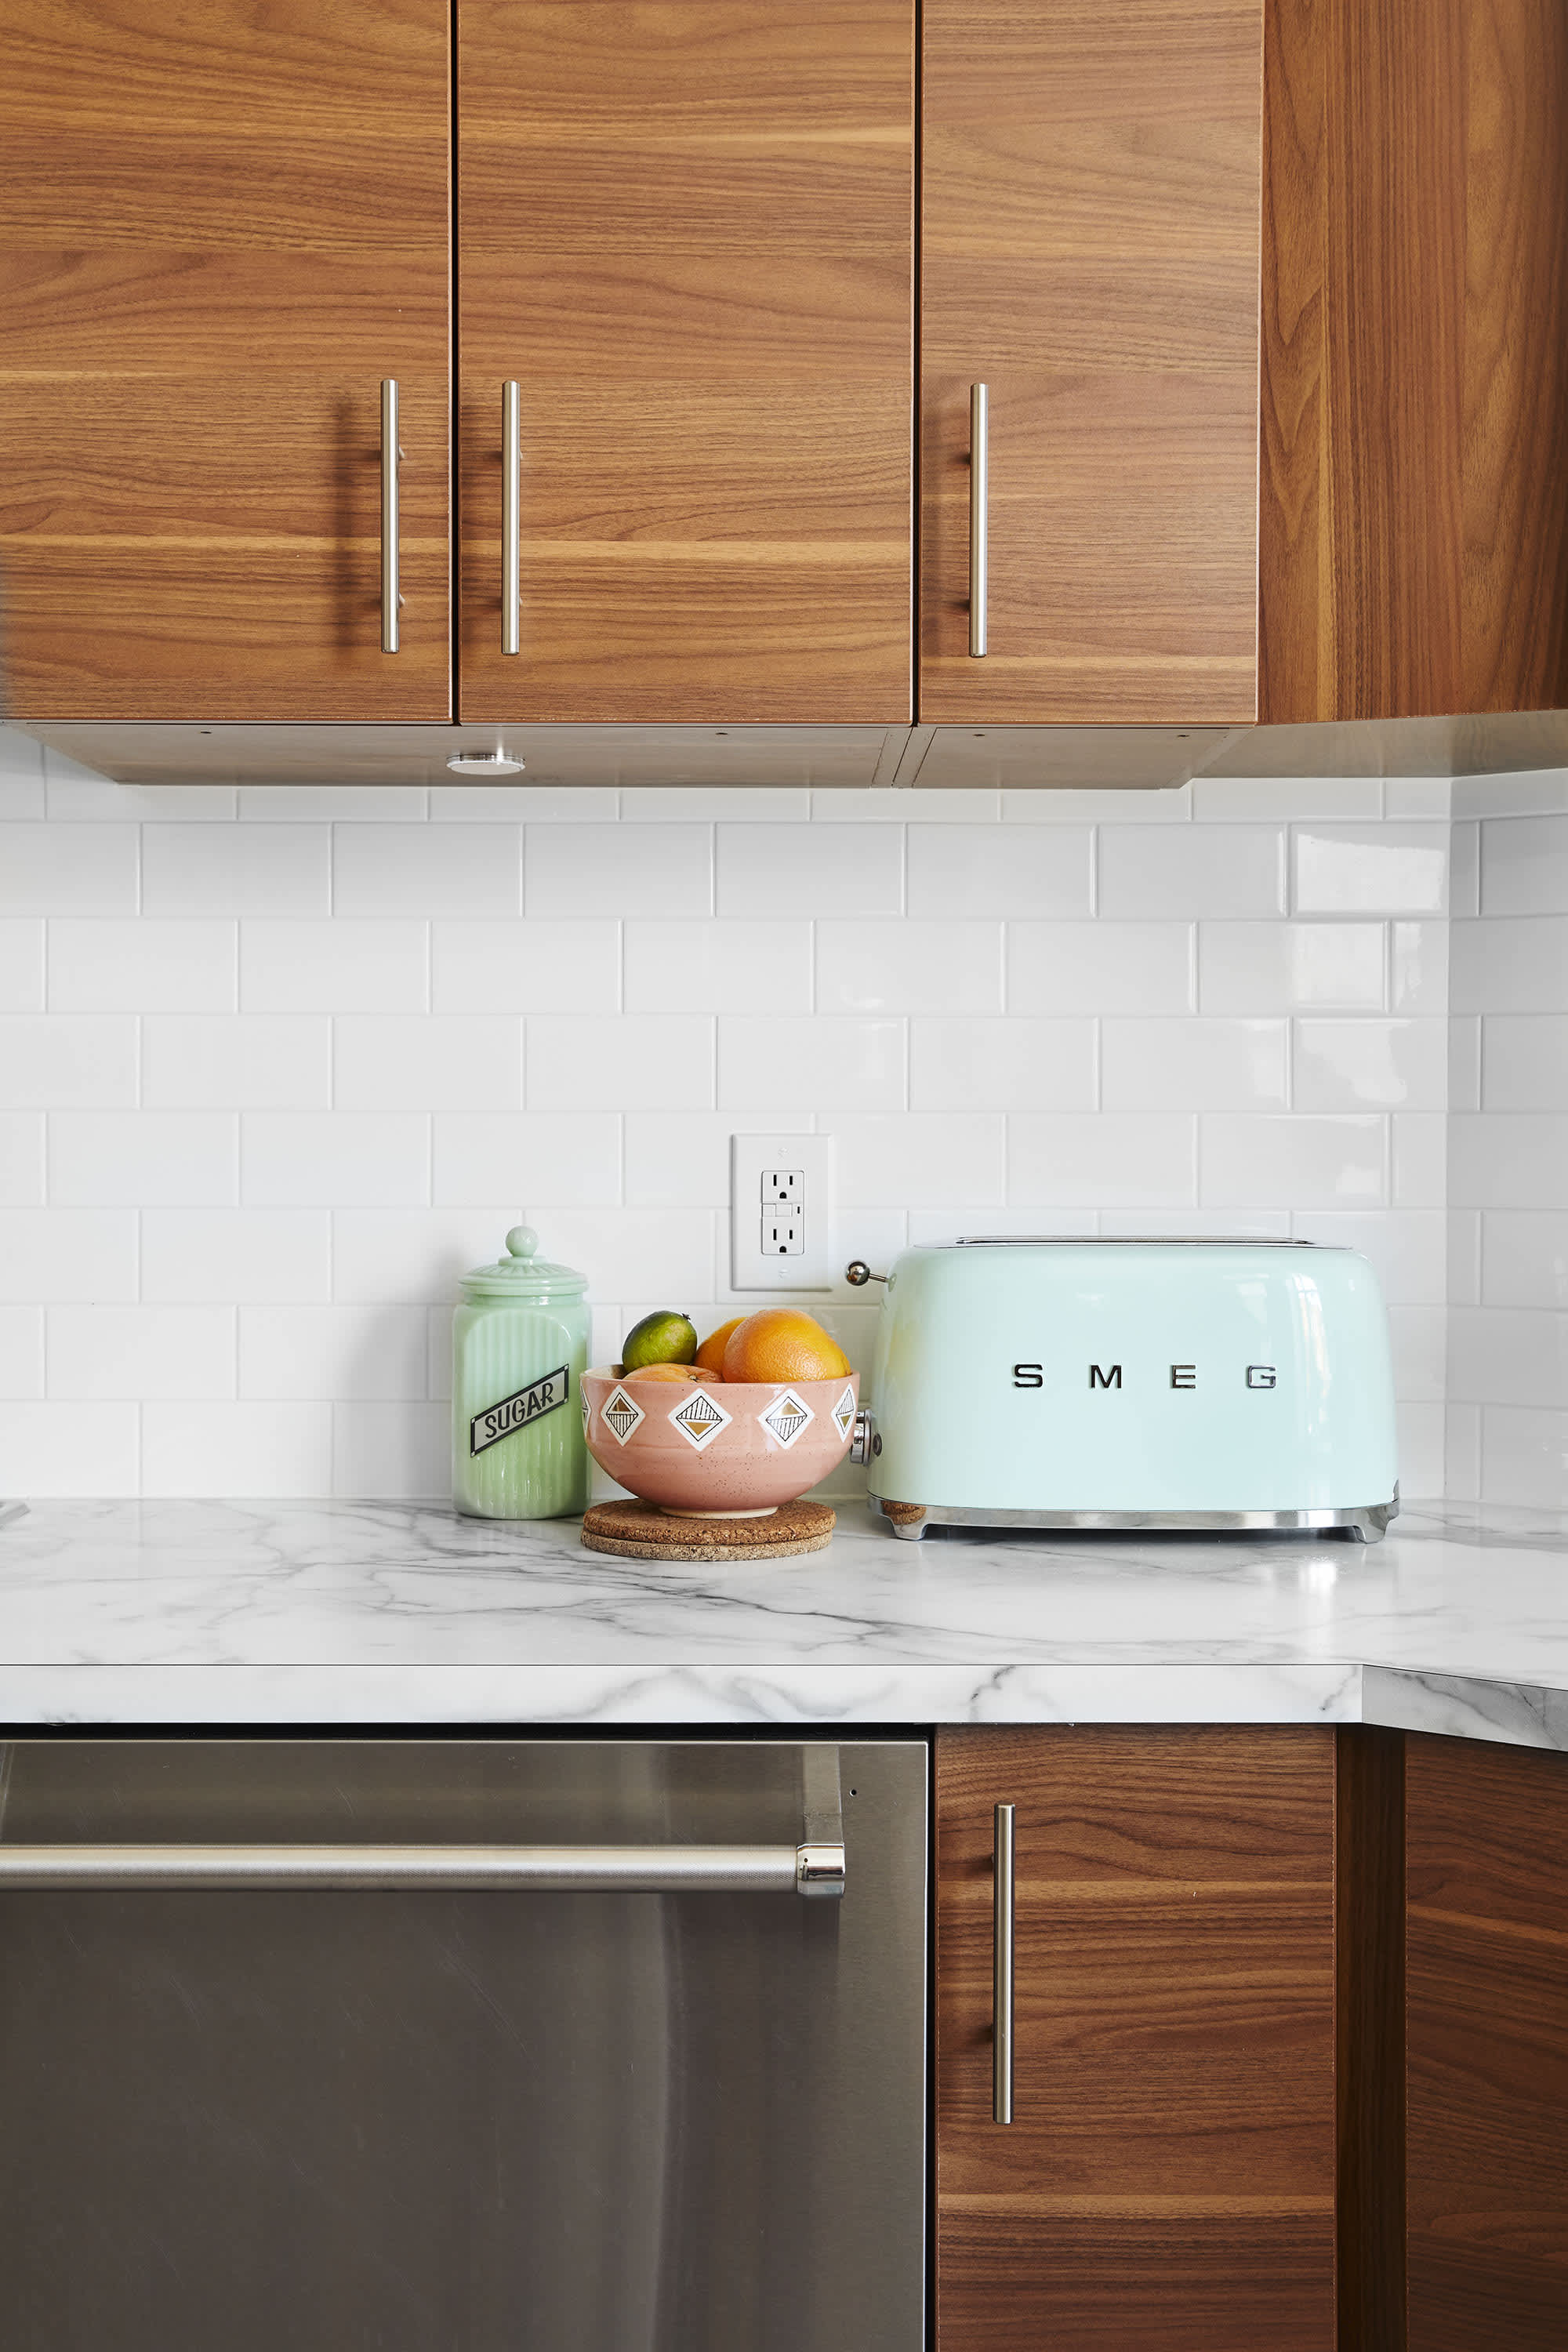 These Expert-Approved Gadgets Can Help Upgrade Your Kitchen for Less